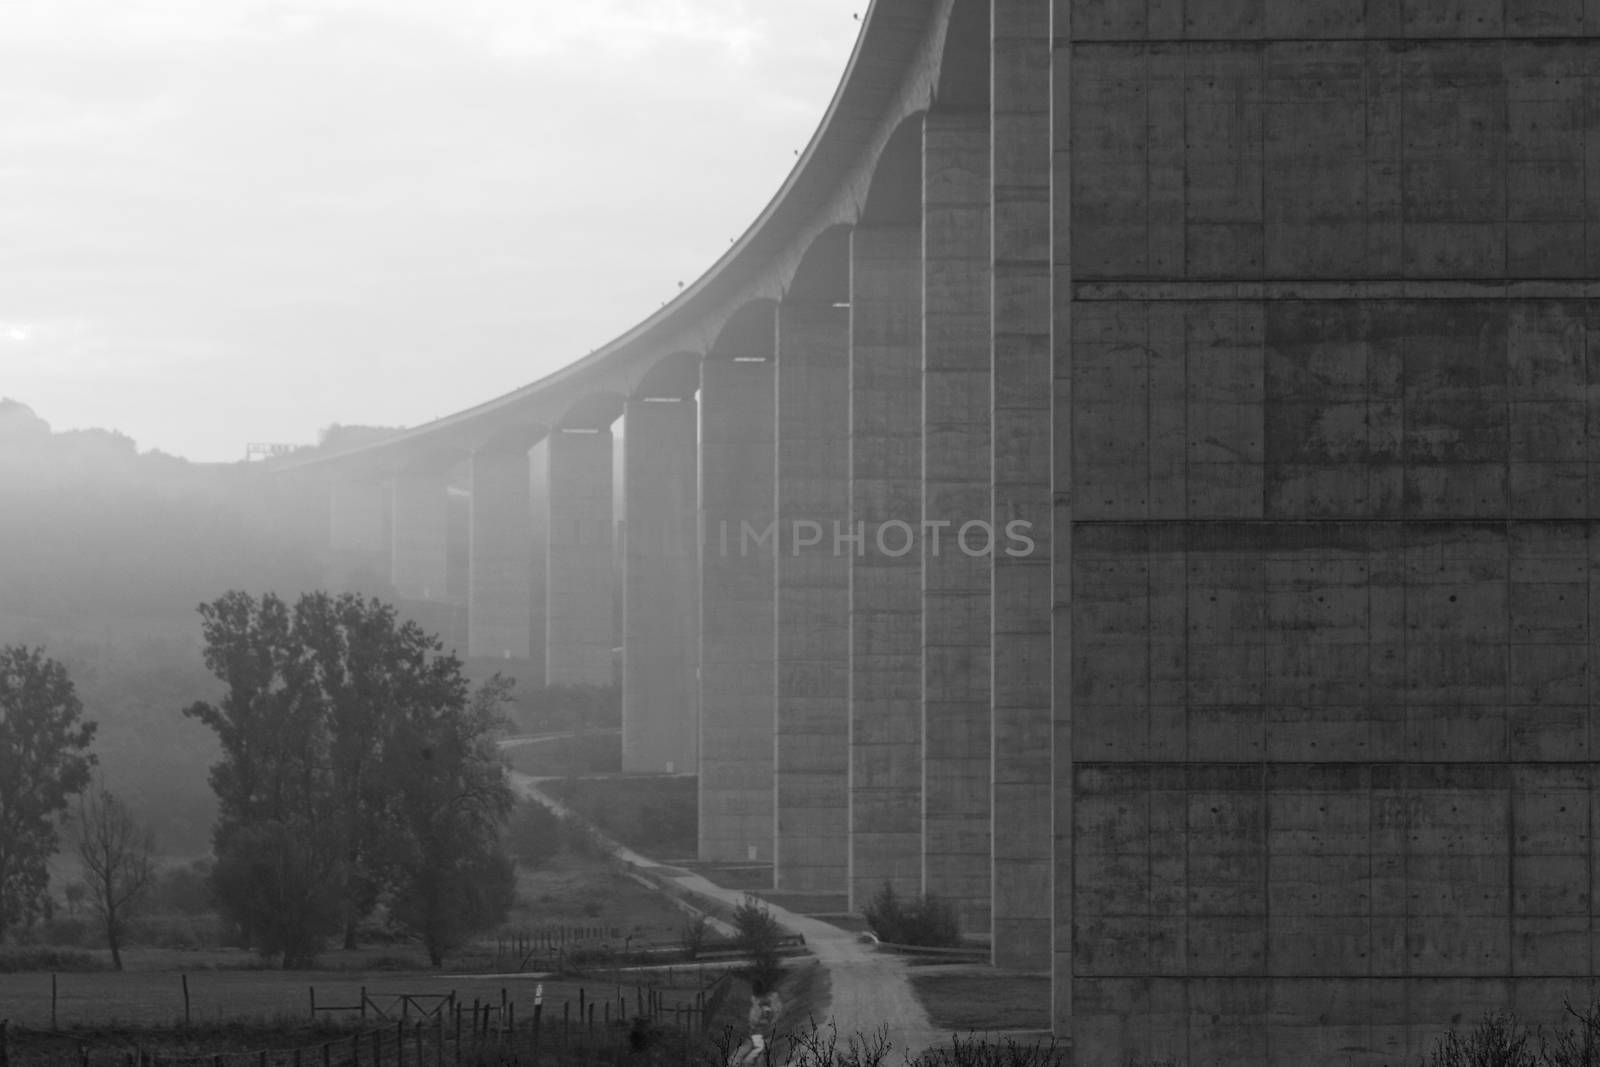 Large highway viaduct ( Hungary) by Nneirda